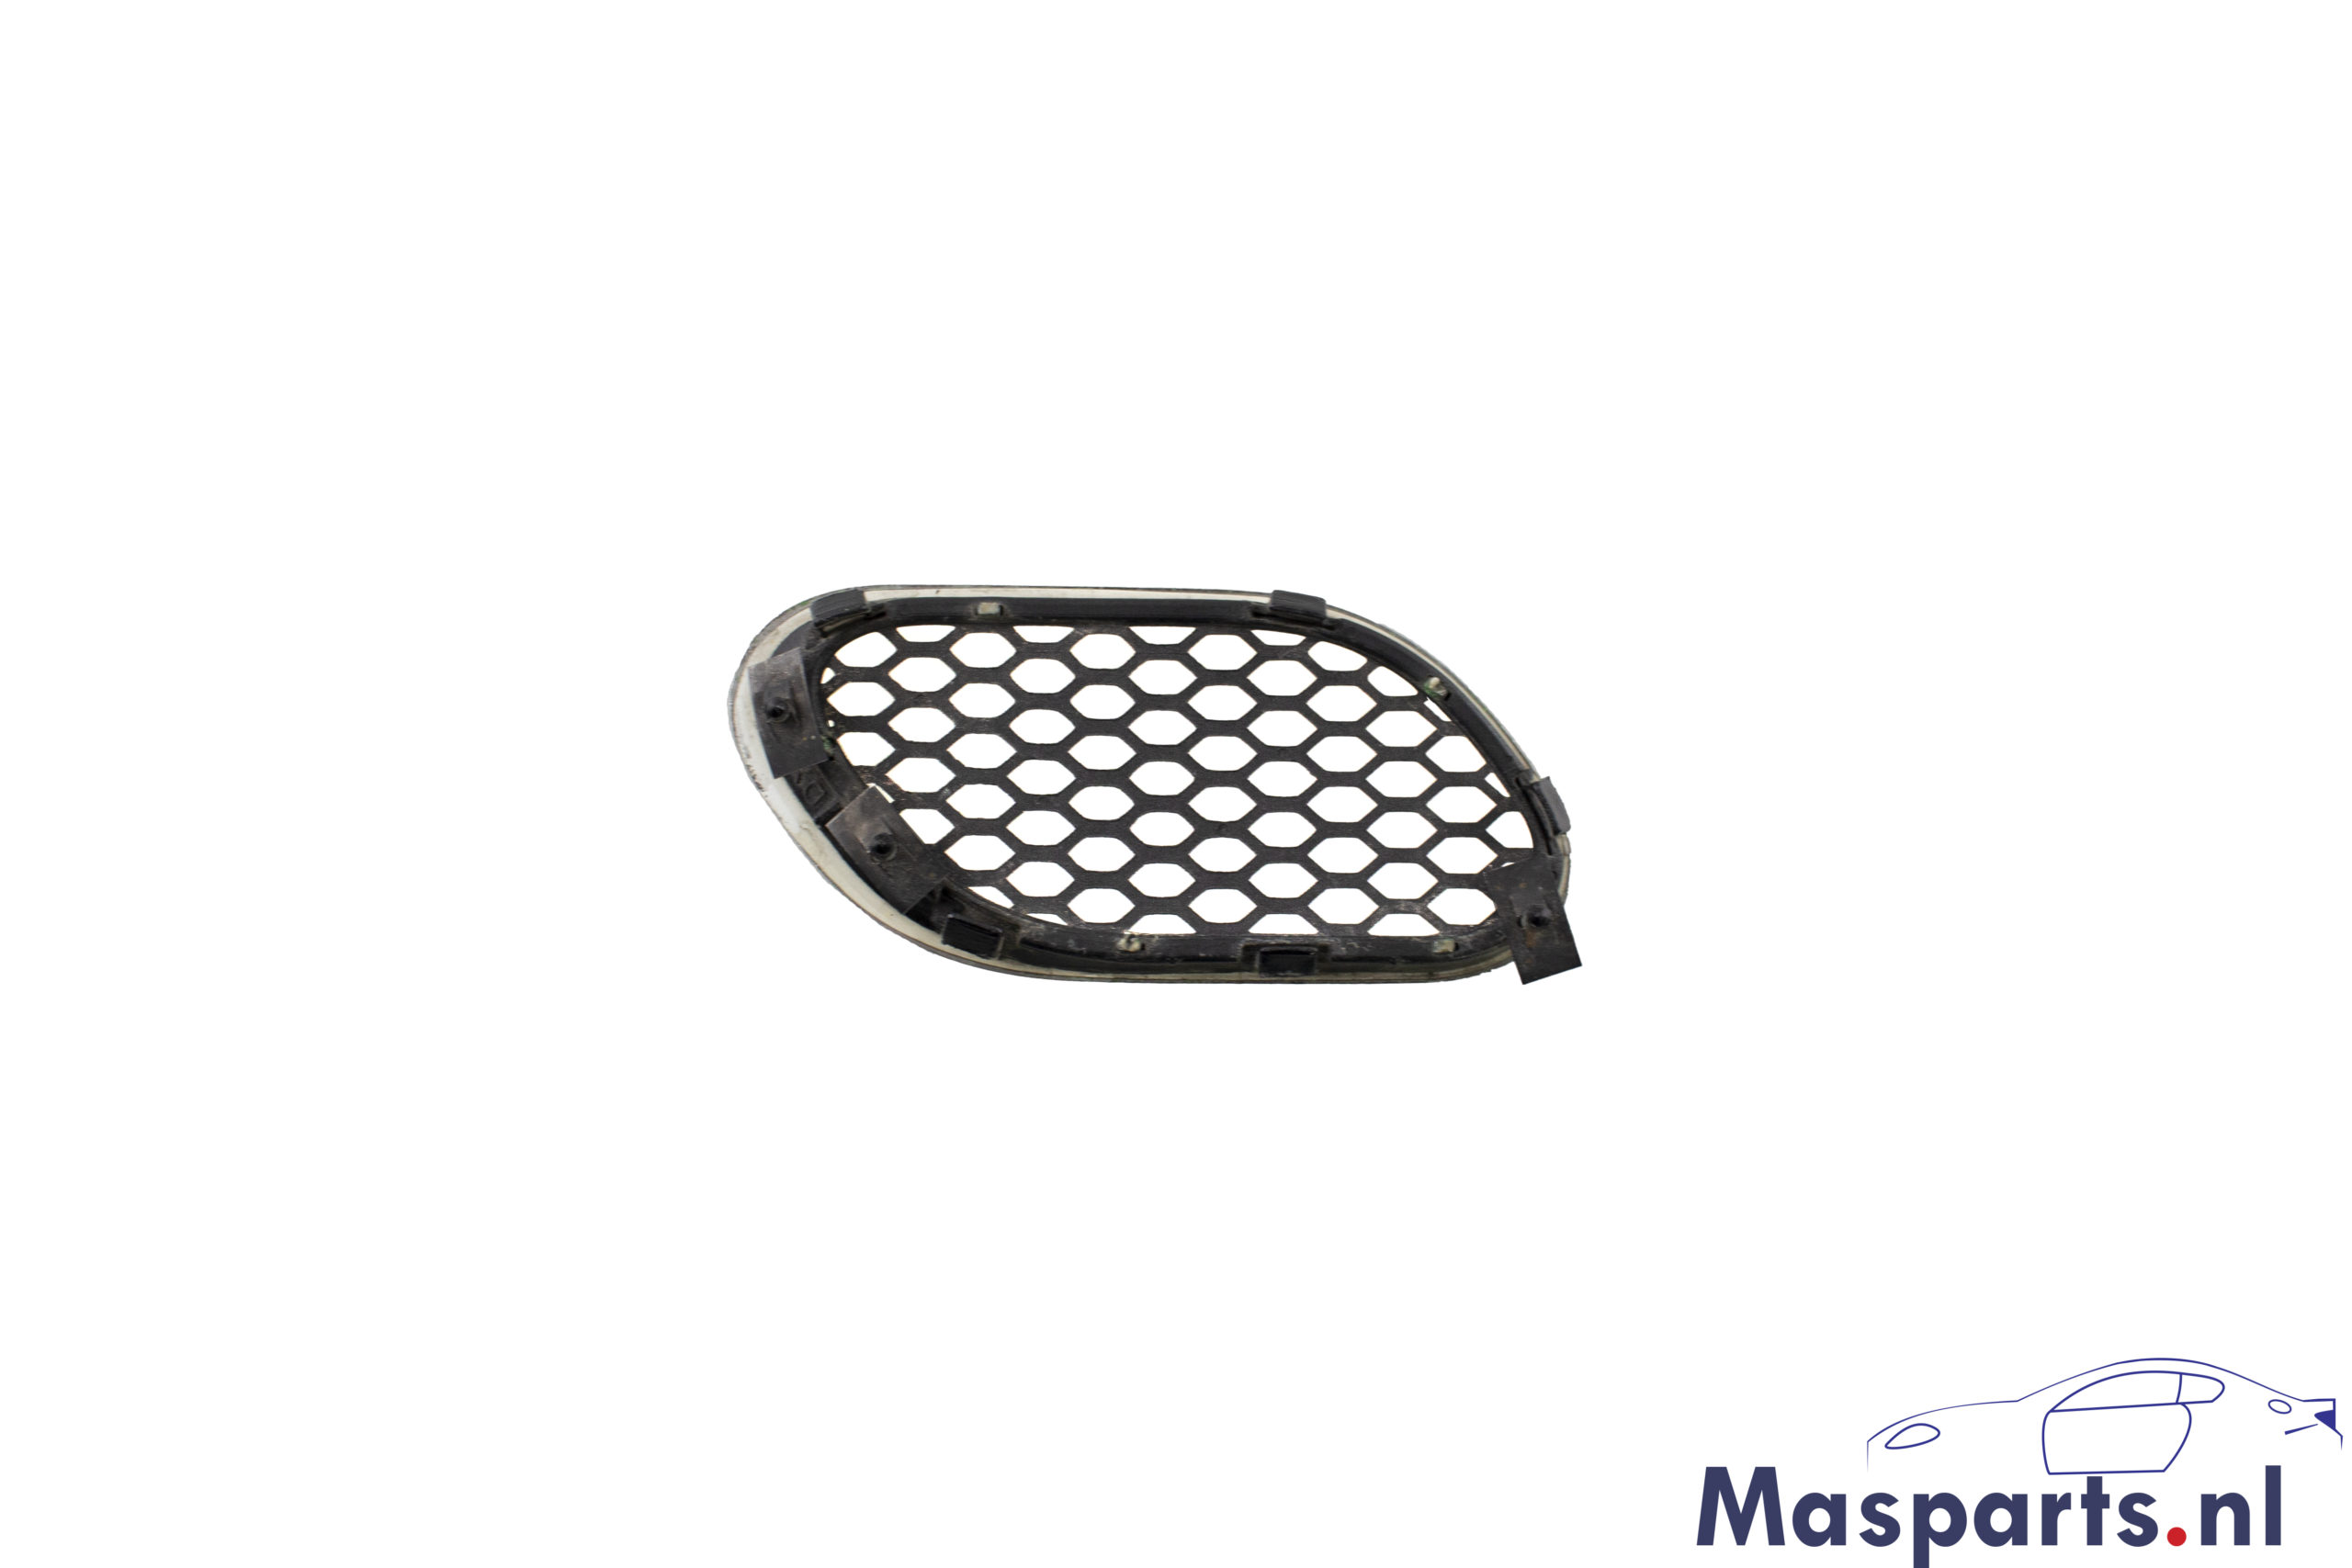 A used Maserati Quattroporte air vent with part number 69283600